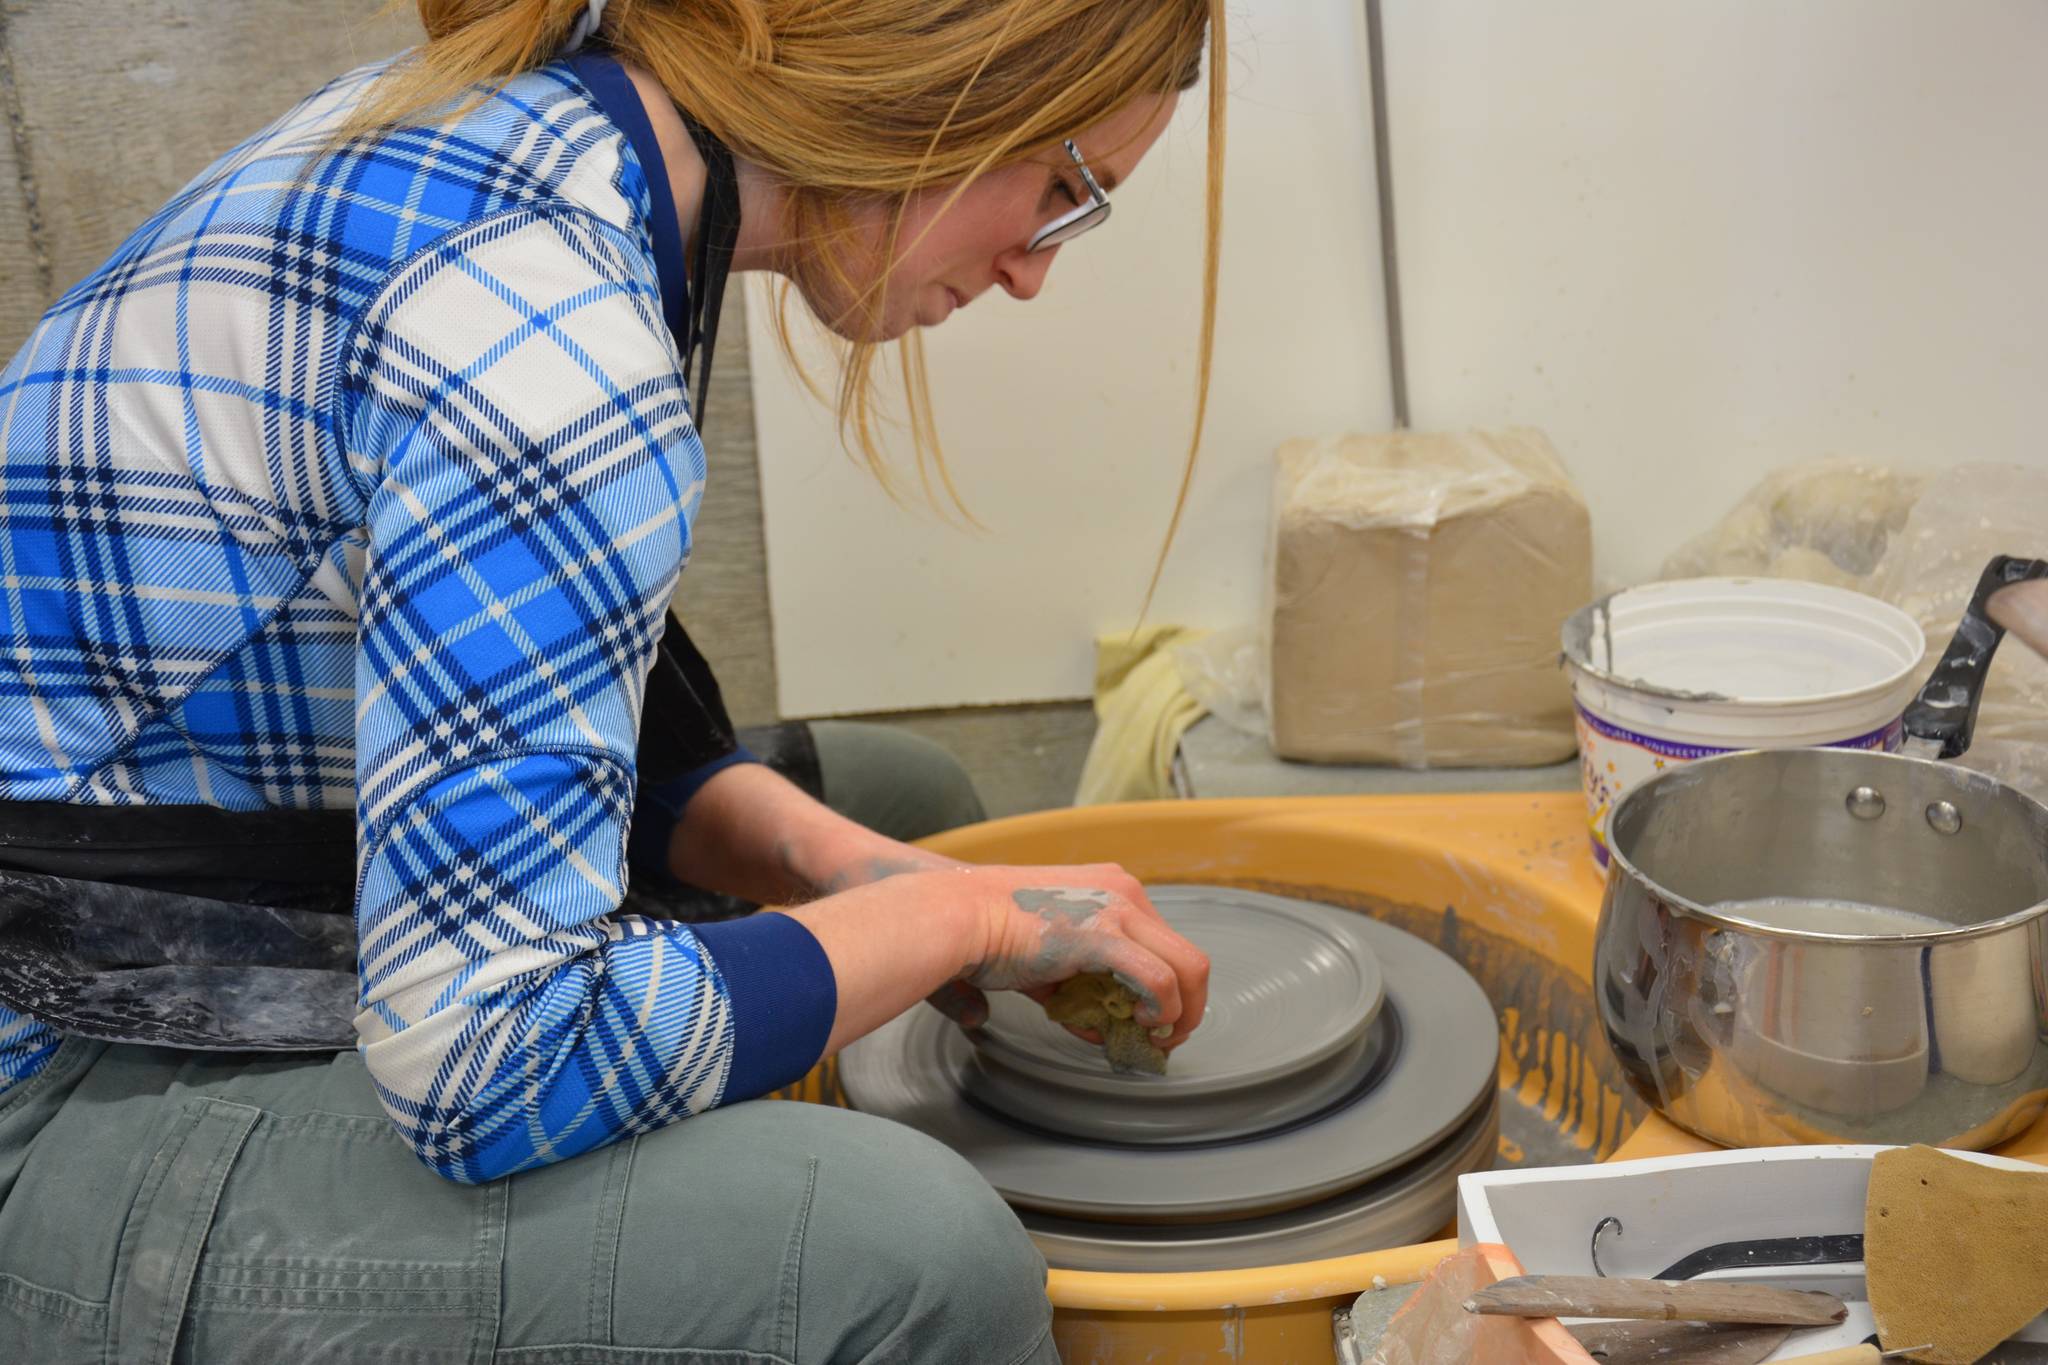 Ceramic artist Katie Miller makes plates for Bunnell Street Arts Center’s annual Plate Project. (Photo provided)